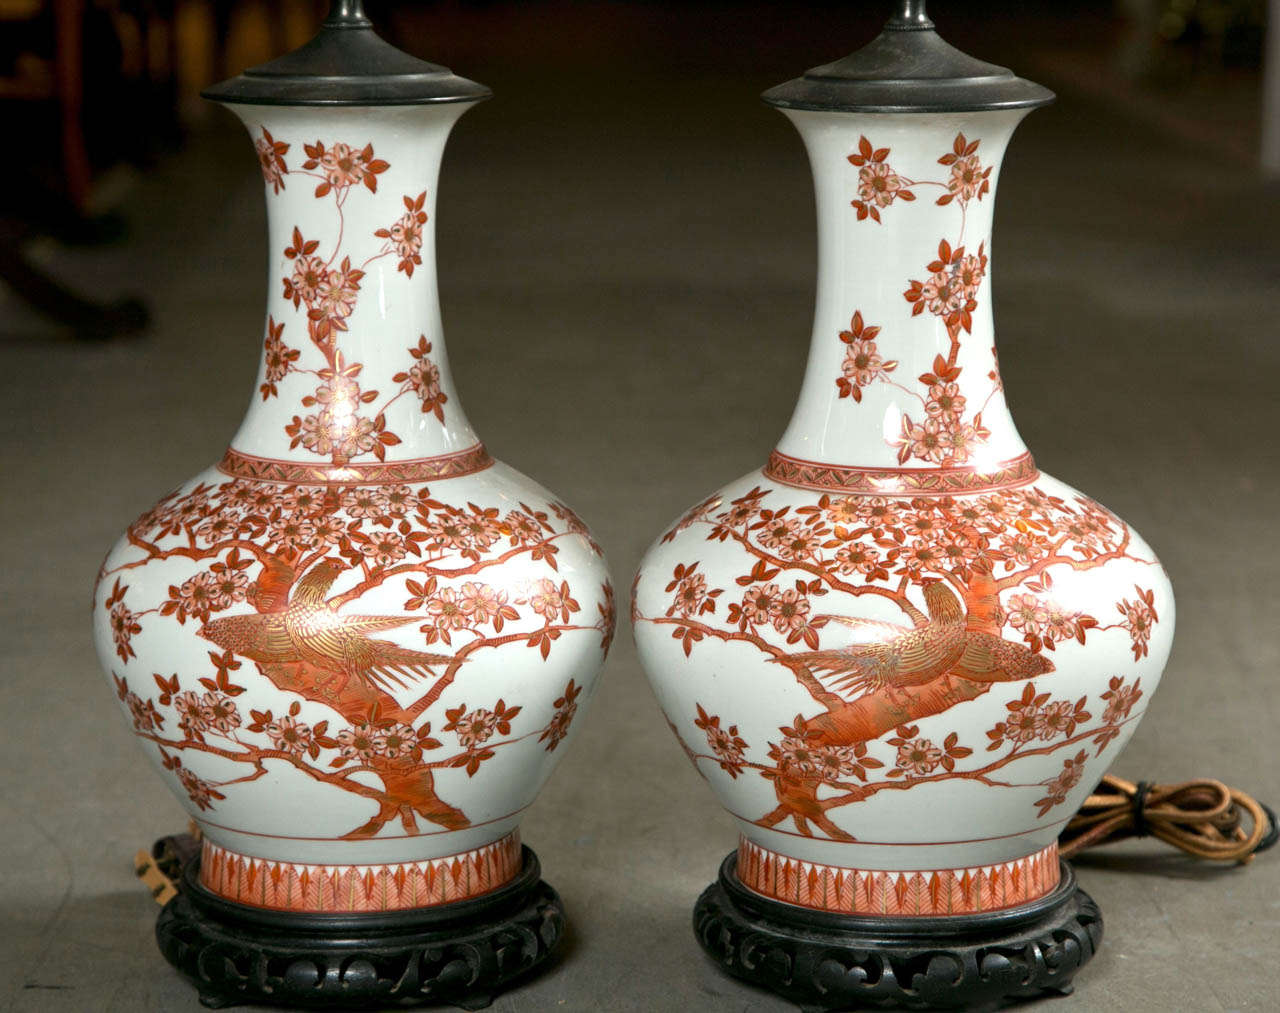 Circa 1930 pair of glazed Chinese ceramic vases as lamps